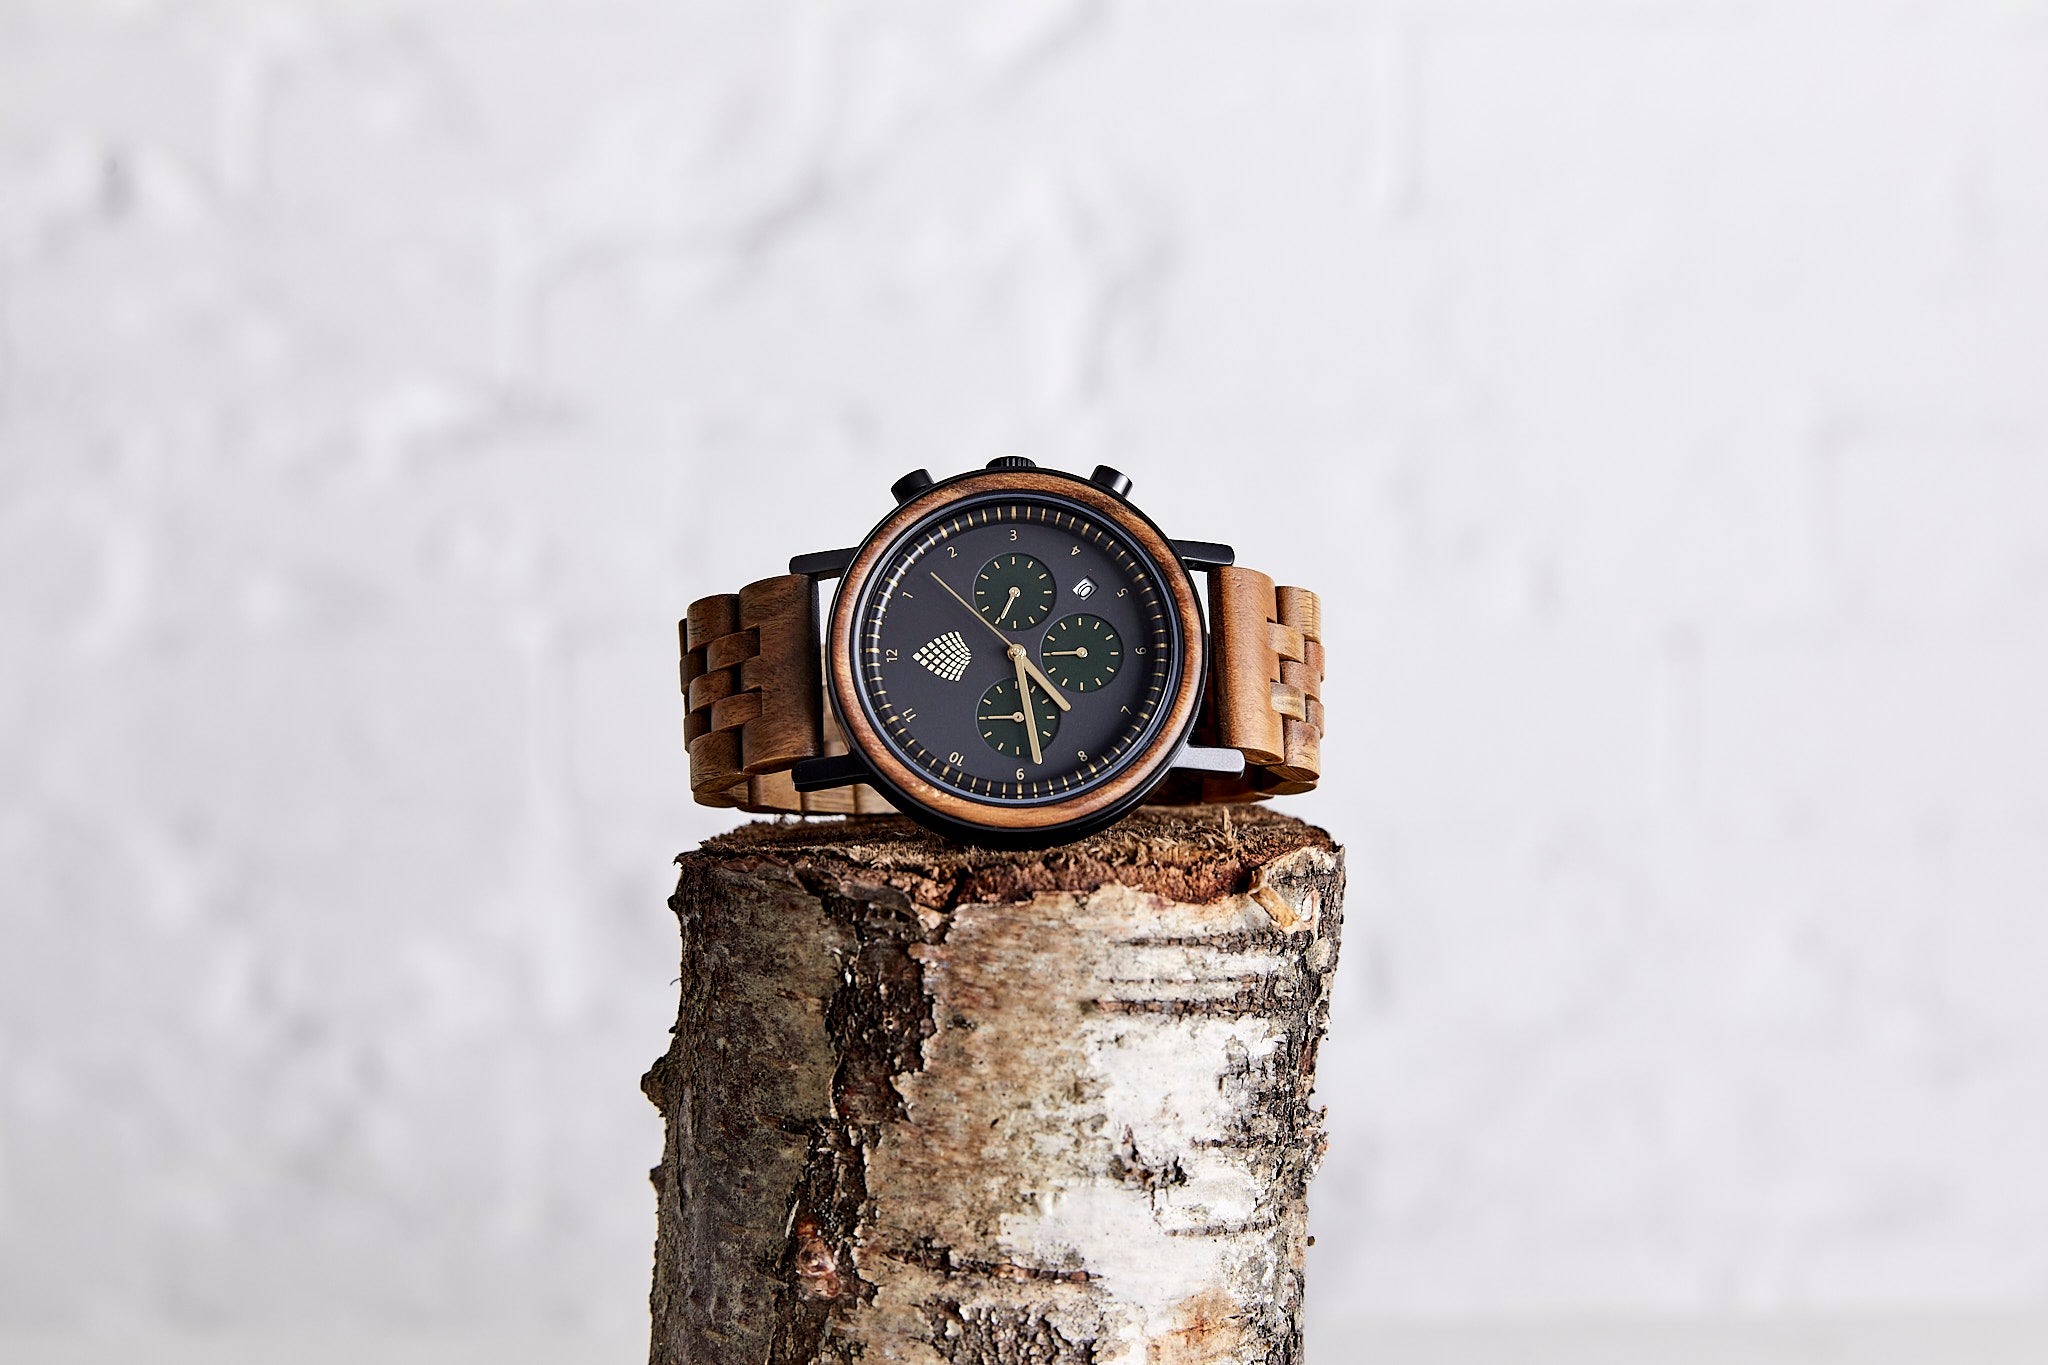 Men's Watches - The Sustainable Watch Company